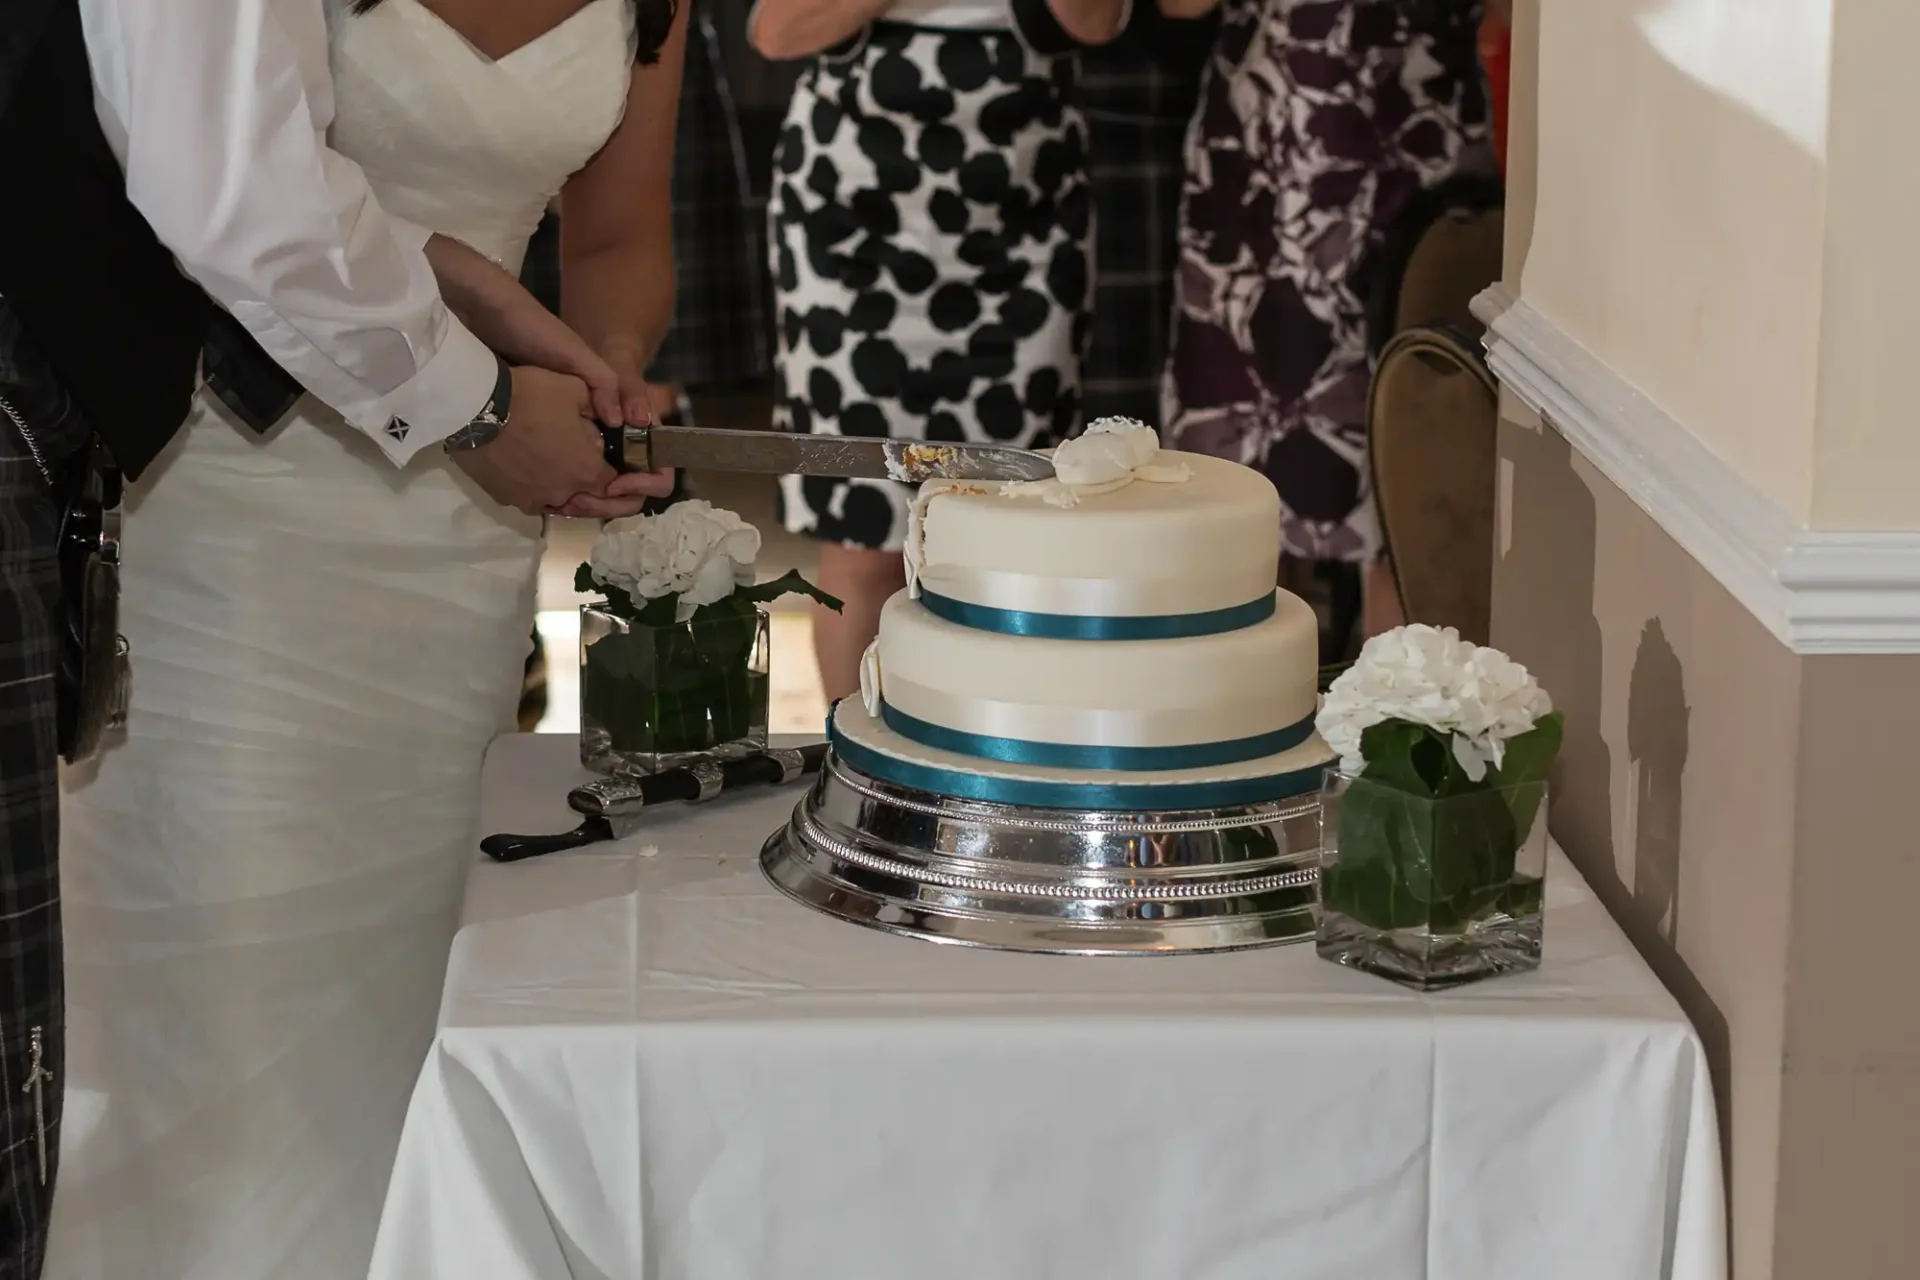 A bride and groom cutting a three-tiered wedding cake with a knife at a reception, surrounded by guests.